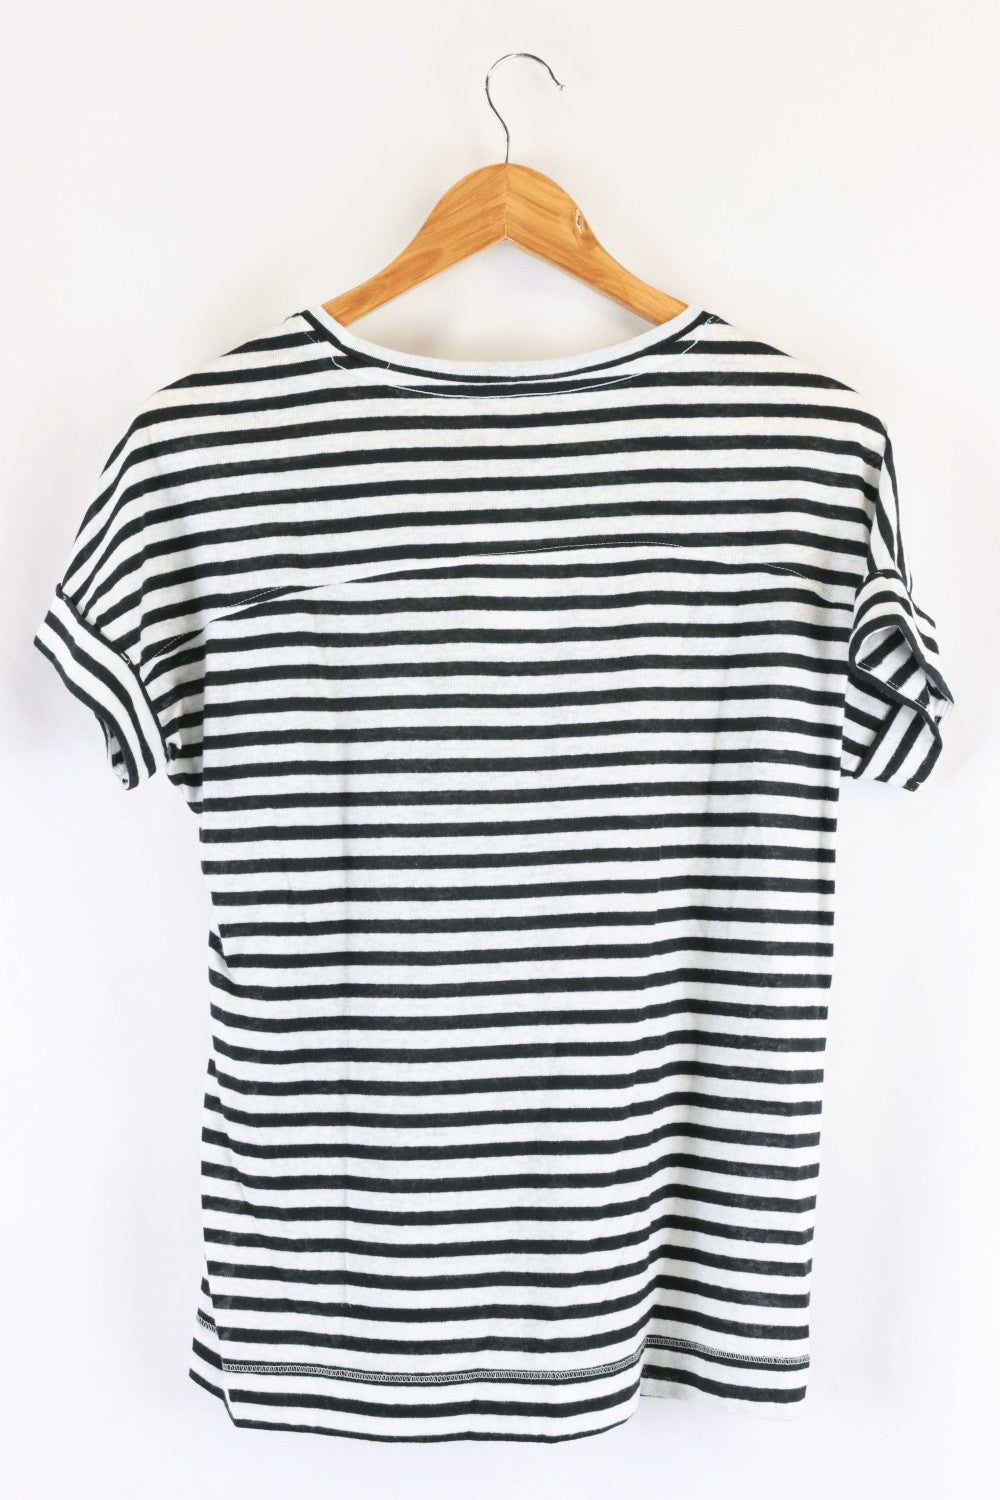 Marks and Spencer Striped Black T Shirt 10